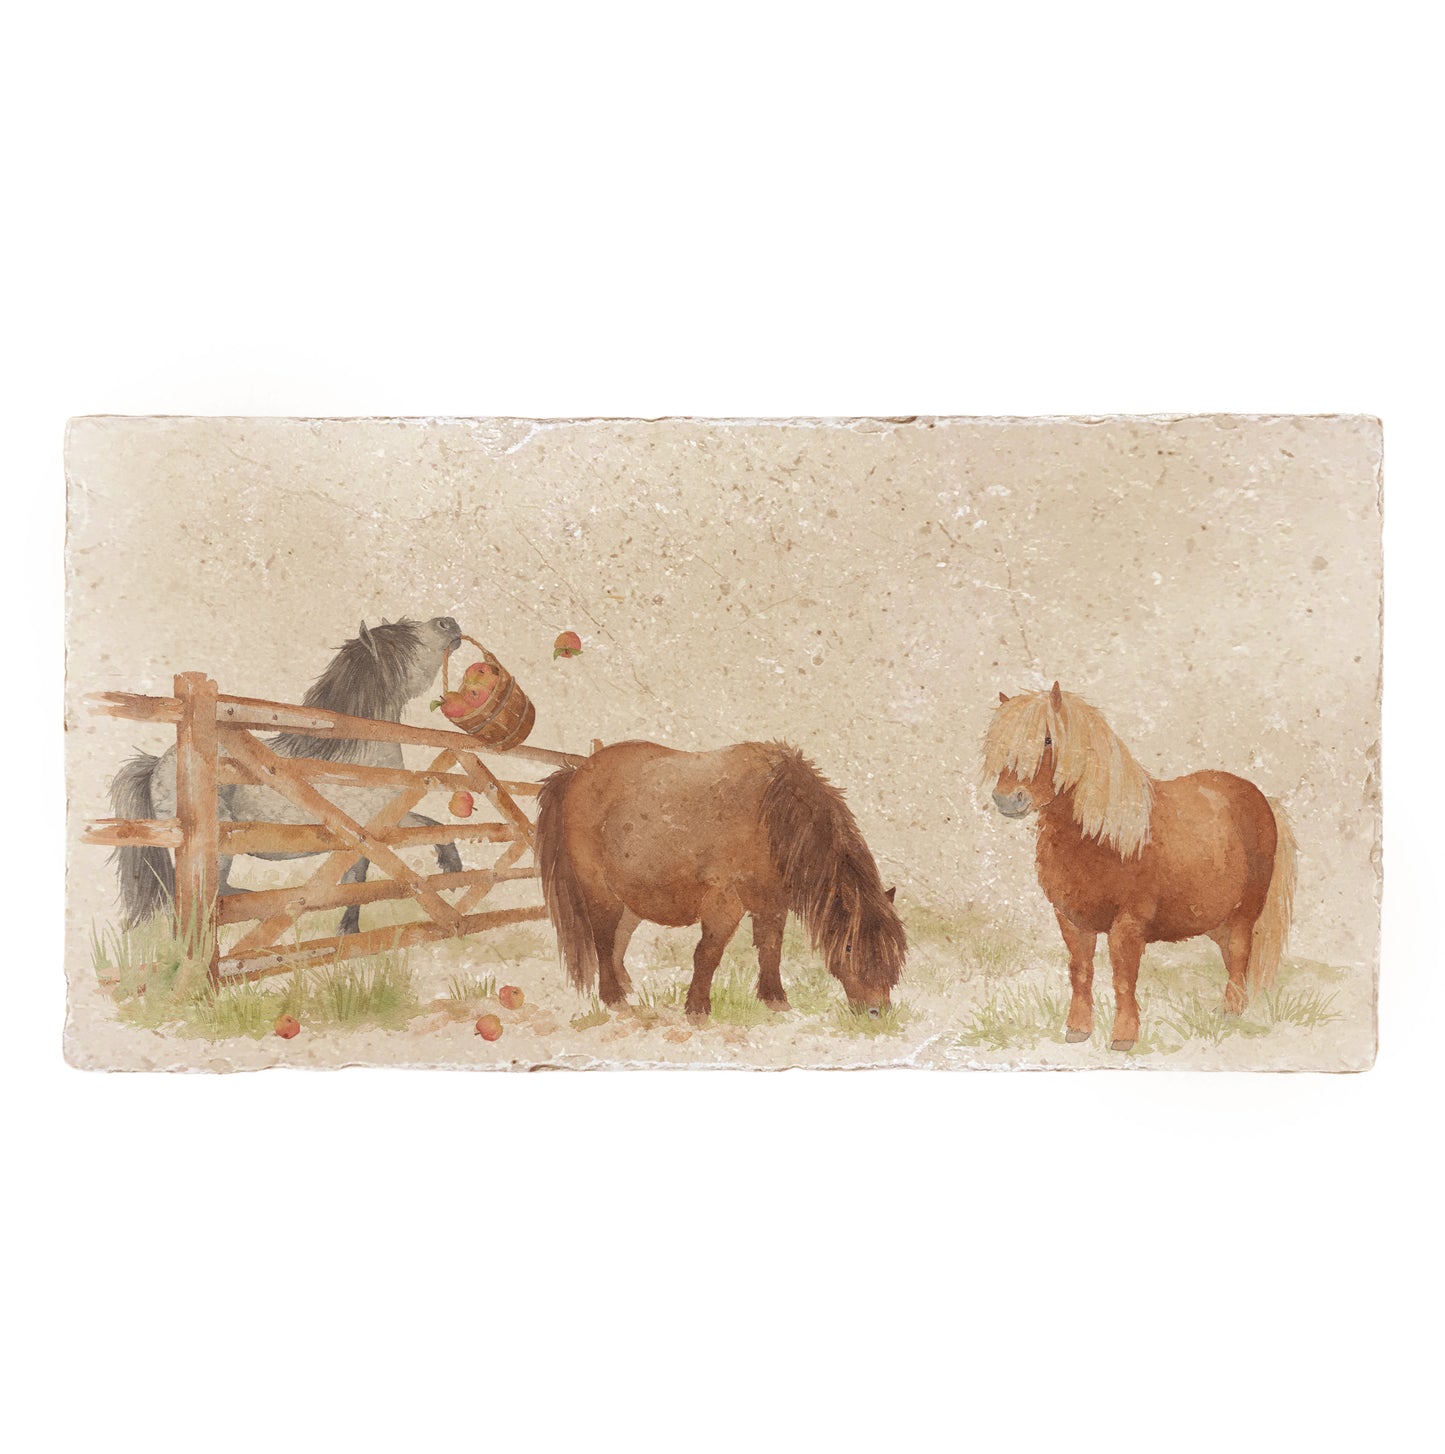 A rectangular marble sharing platter, featuring a watercolour design of three cheeky Shetland ponies stealing apples.